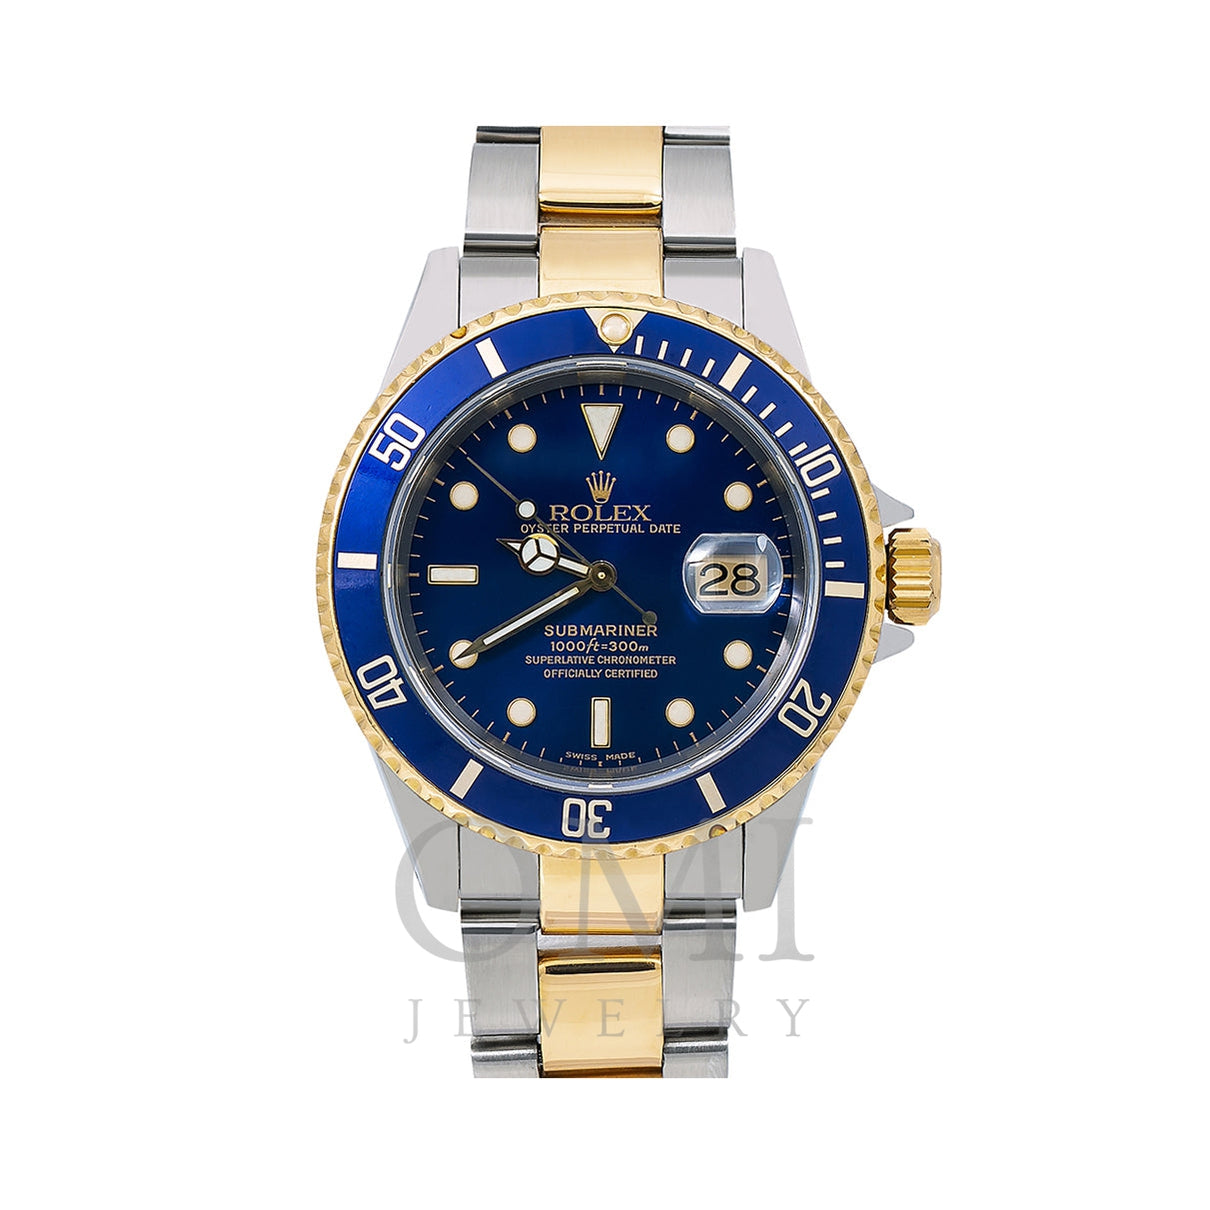 Cusco mel Morgen Rolex Submariner 16613 40MM Blue Dial With Two Tone Bracelet - OMI Jewelry